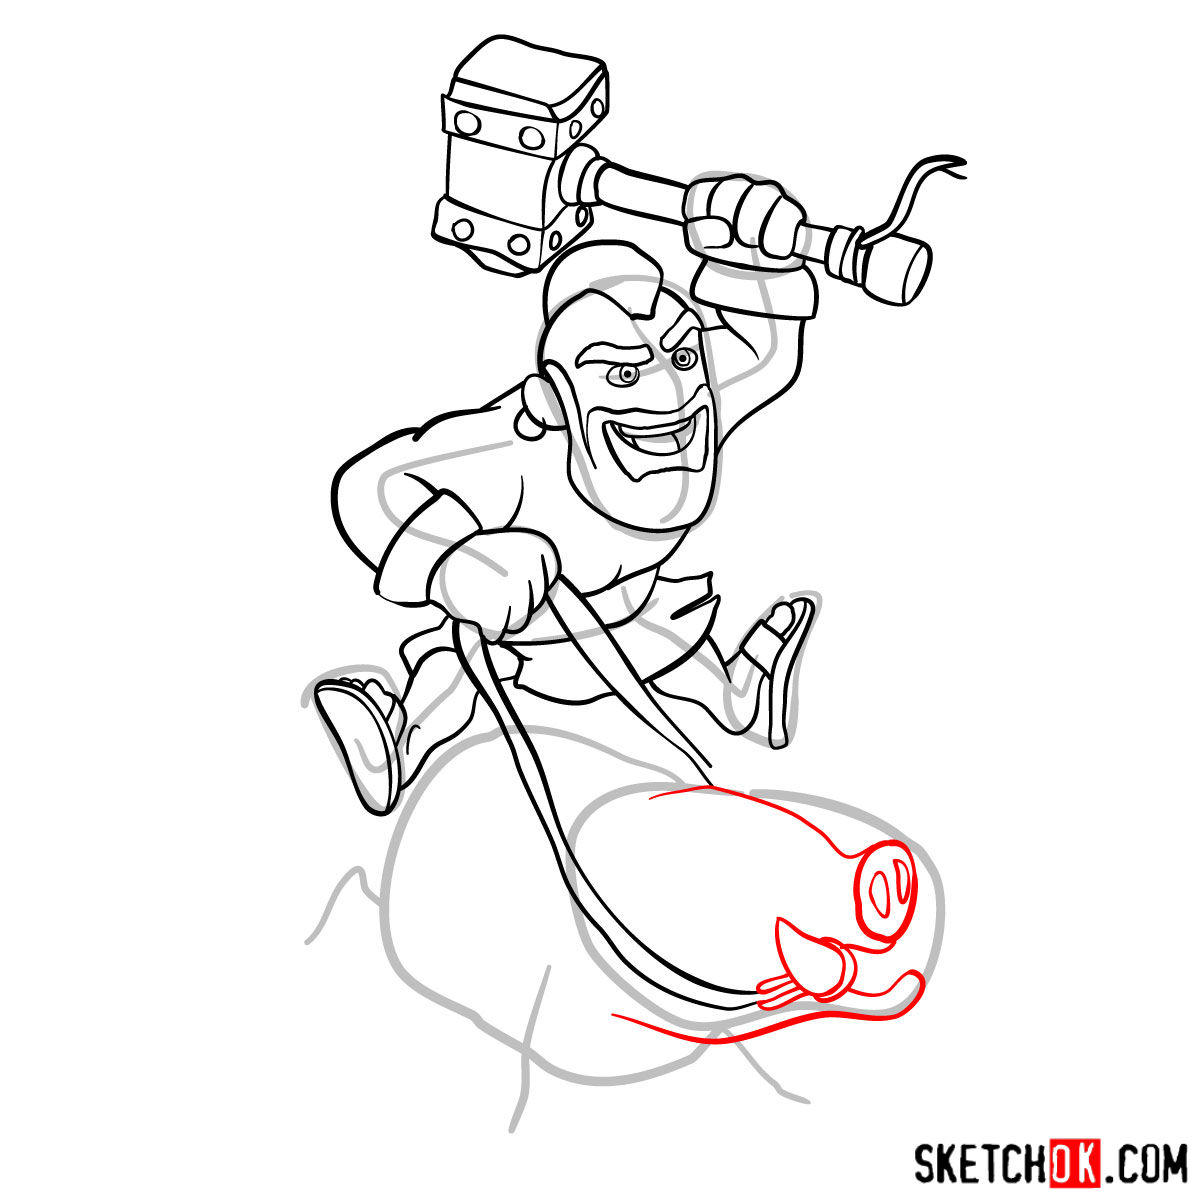 How to draw Hog Rider from Clash of Clans - step 10